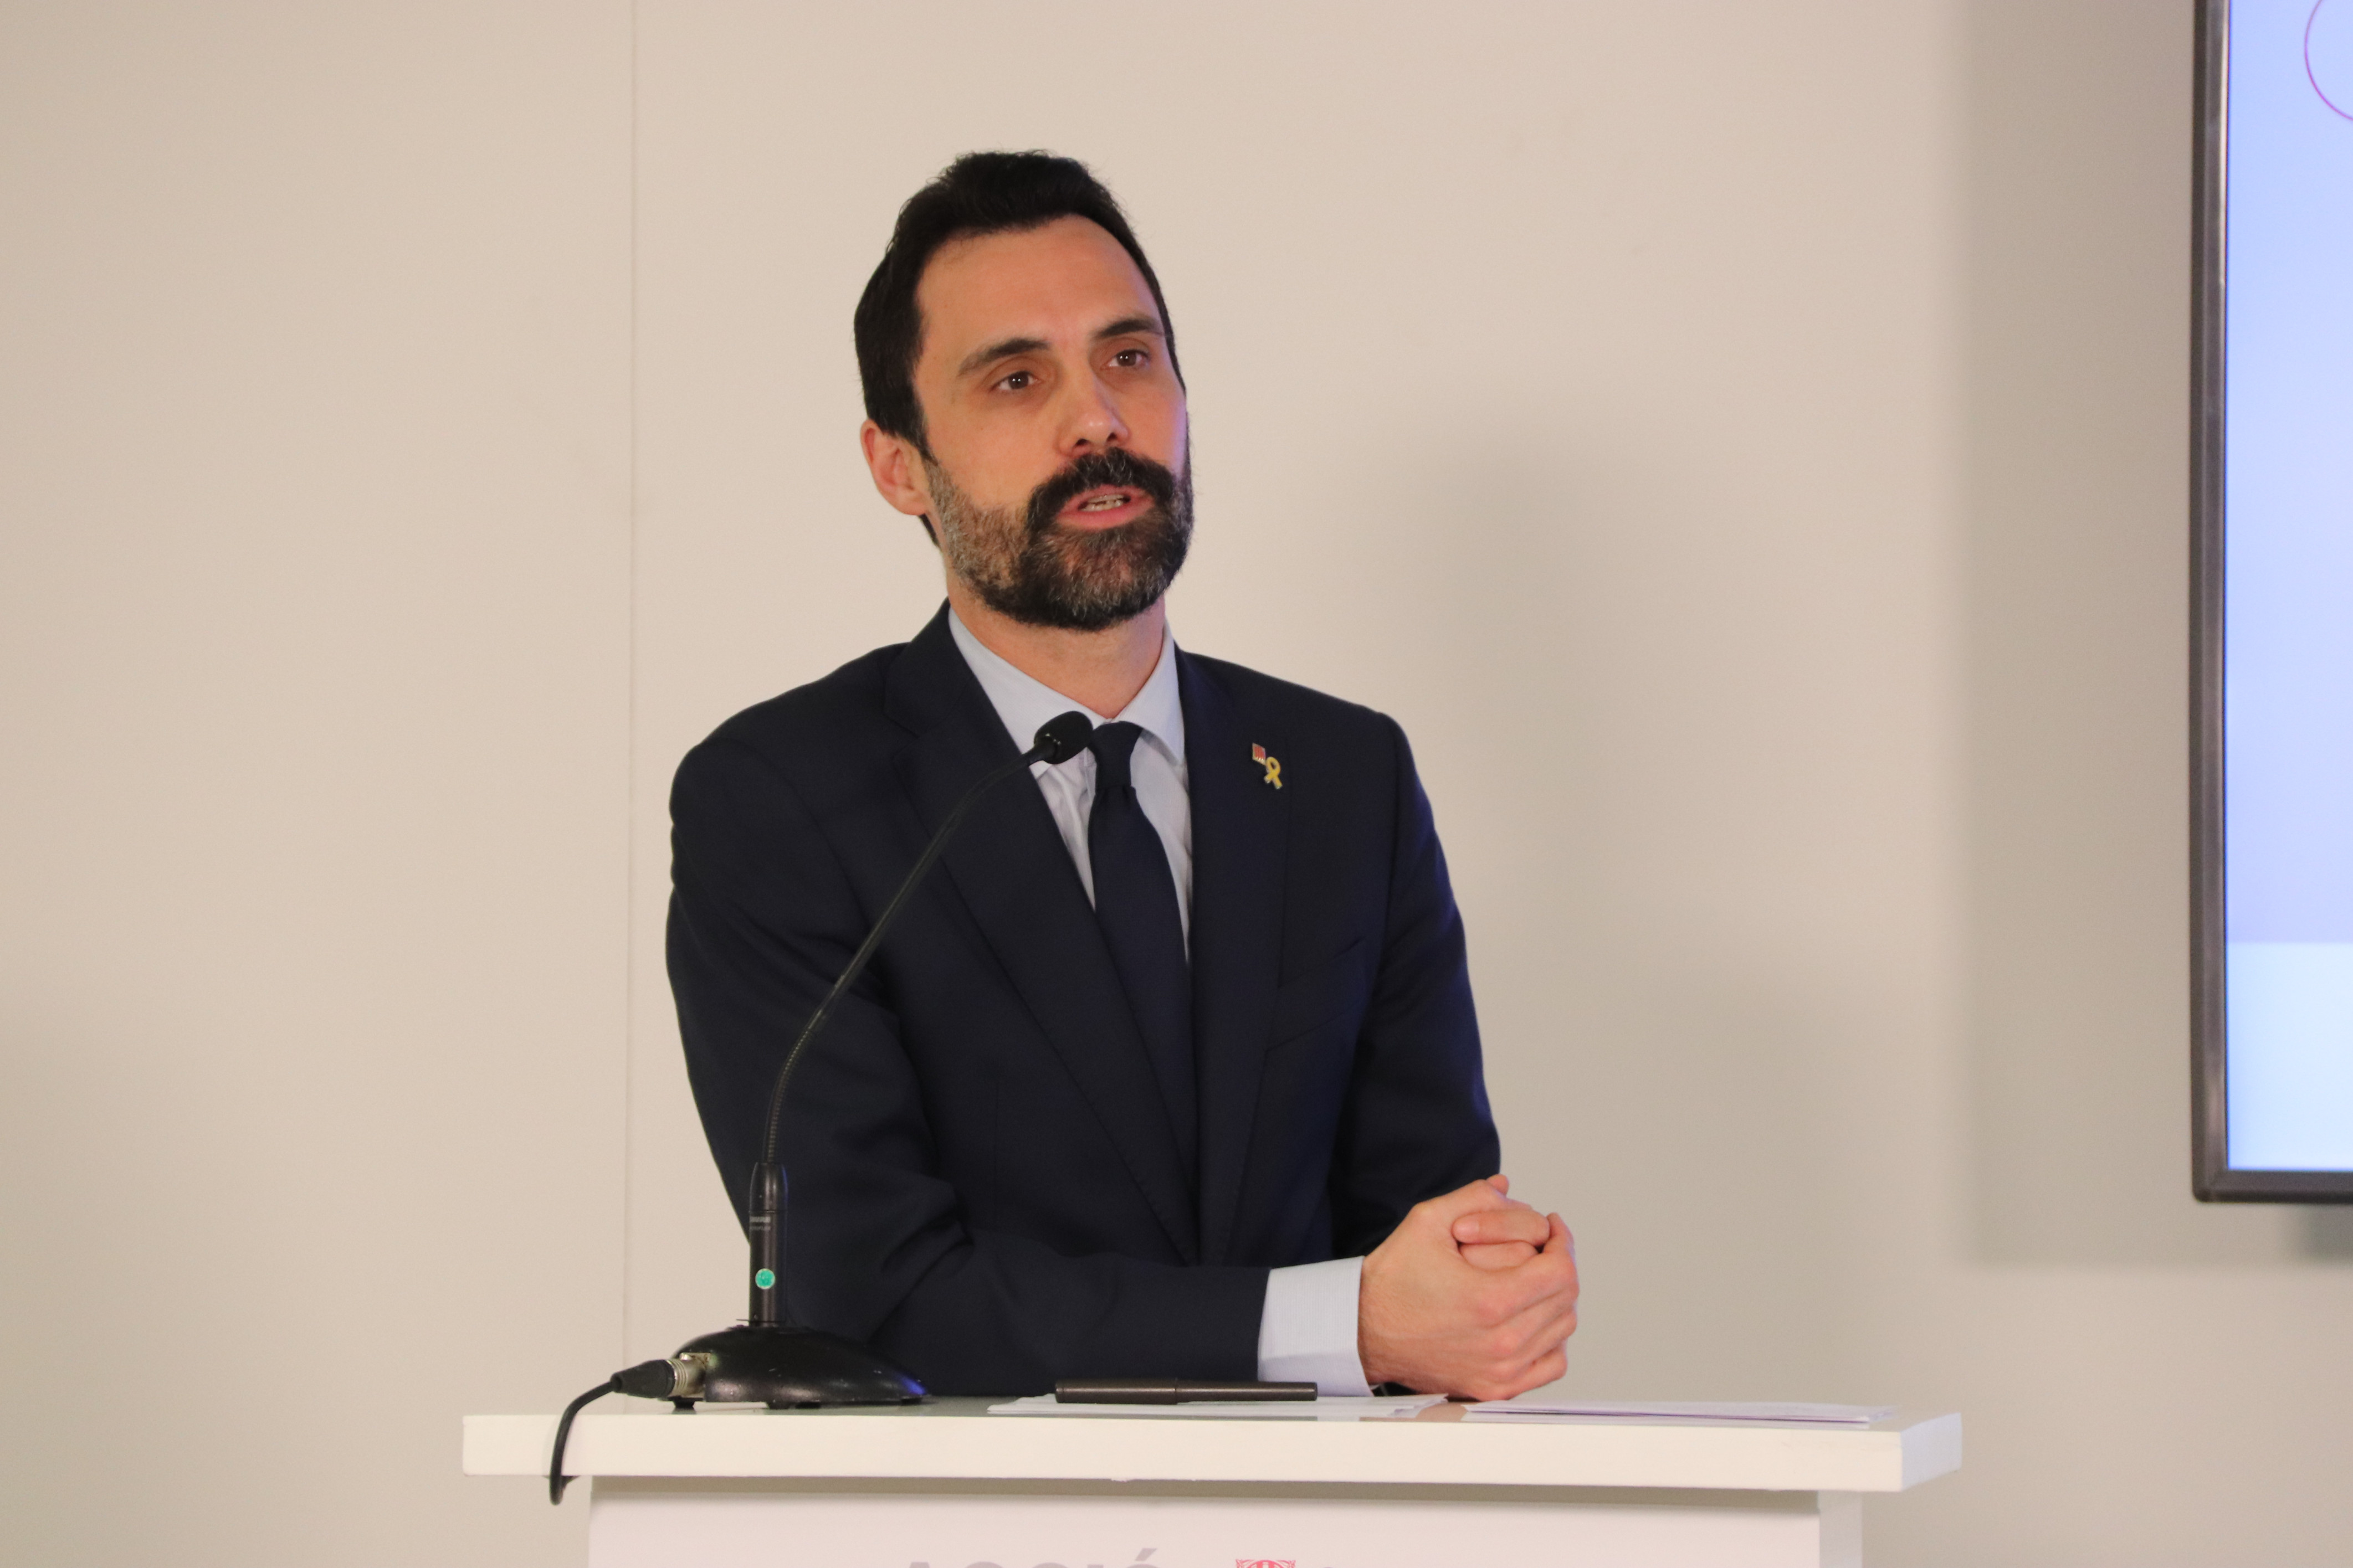 Business and labor minister Roger Torrent in an event in Barcelona on February 7, 2022 (by Maria Alenyà)